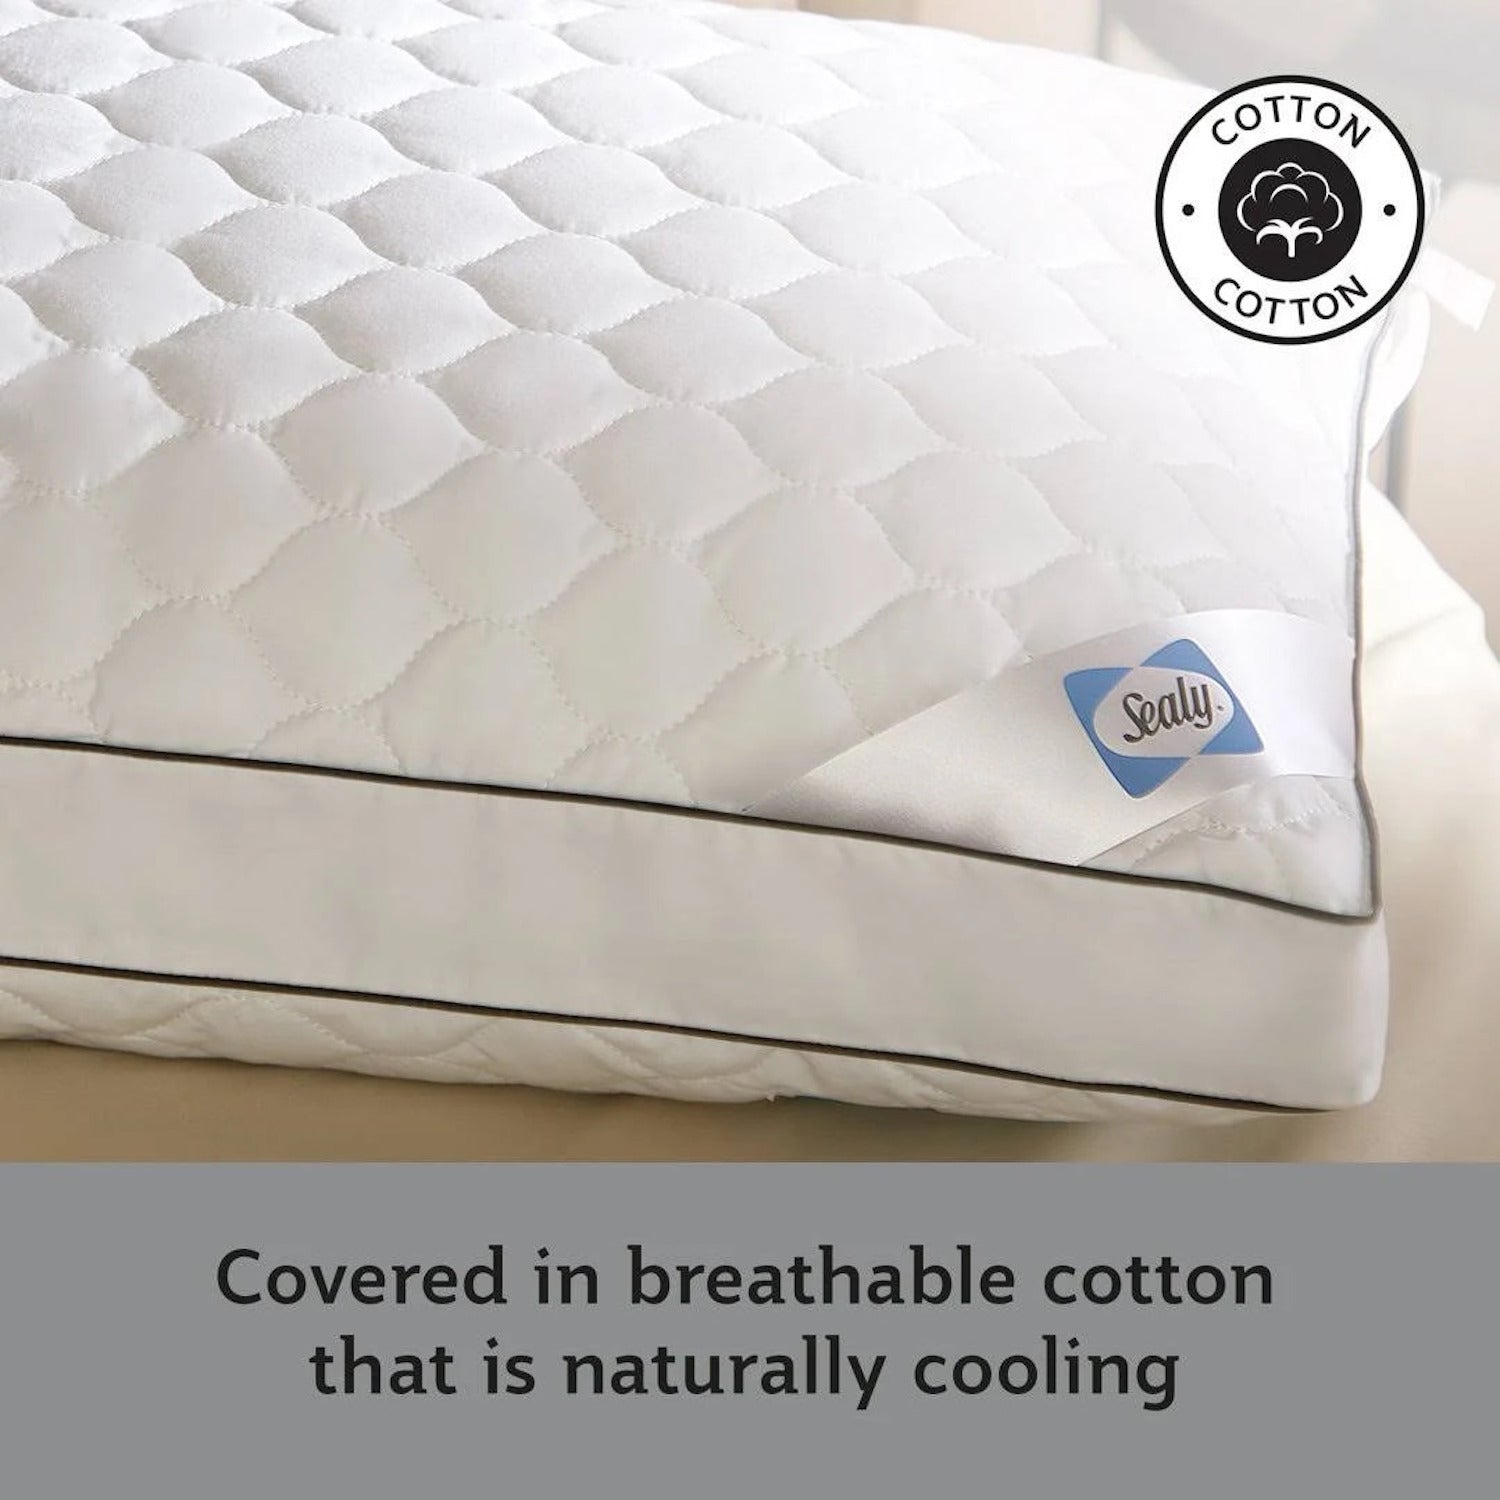 The Sealy Side Sleeper Pillow is covered in breathable cotton that is naturally cooling 